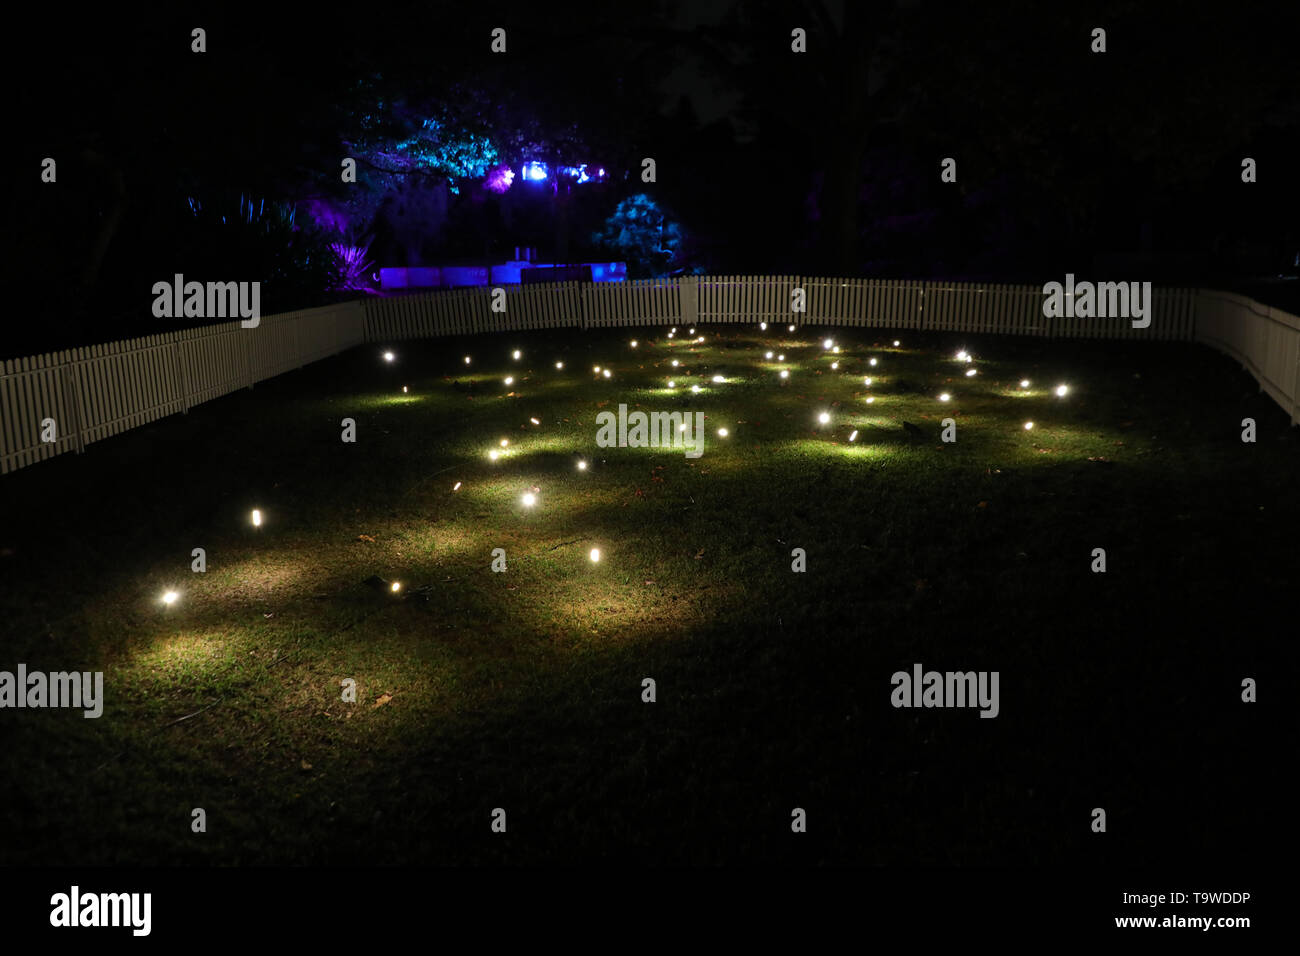 Sydney, Australia. 20th May 2019. From 24 May until 15 June the captivating grounds of the Royal Botanic Garden Sydney will be illuminated by artworks that reflect both light and nature when Vivid Sydney returns for 2019. Entering through the Queen Elizabeth II Gates, visitors can explore 15 mesmerising, playful and informative installations. Pictured: an aerial ballet of 500 tiny light points in the shimmering Firefly Field. Credit: Richard Milnes/Alamy Live News Stock Photo